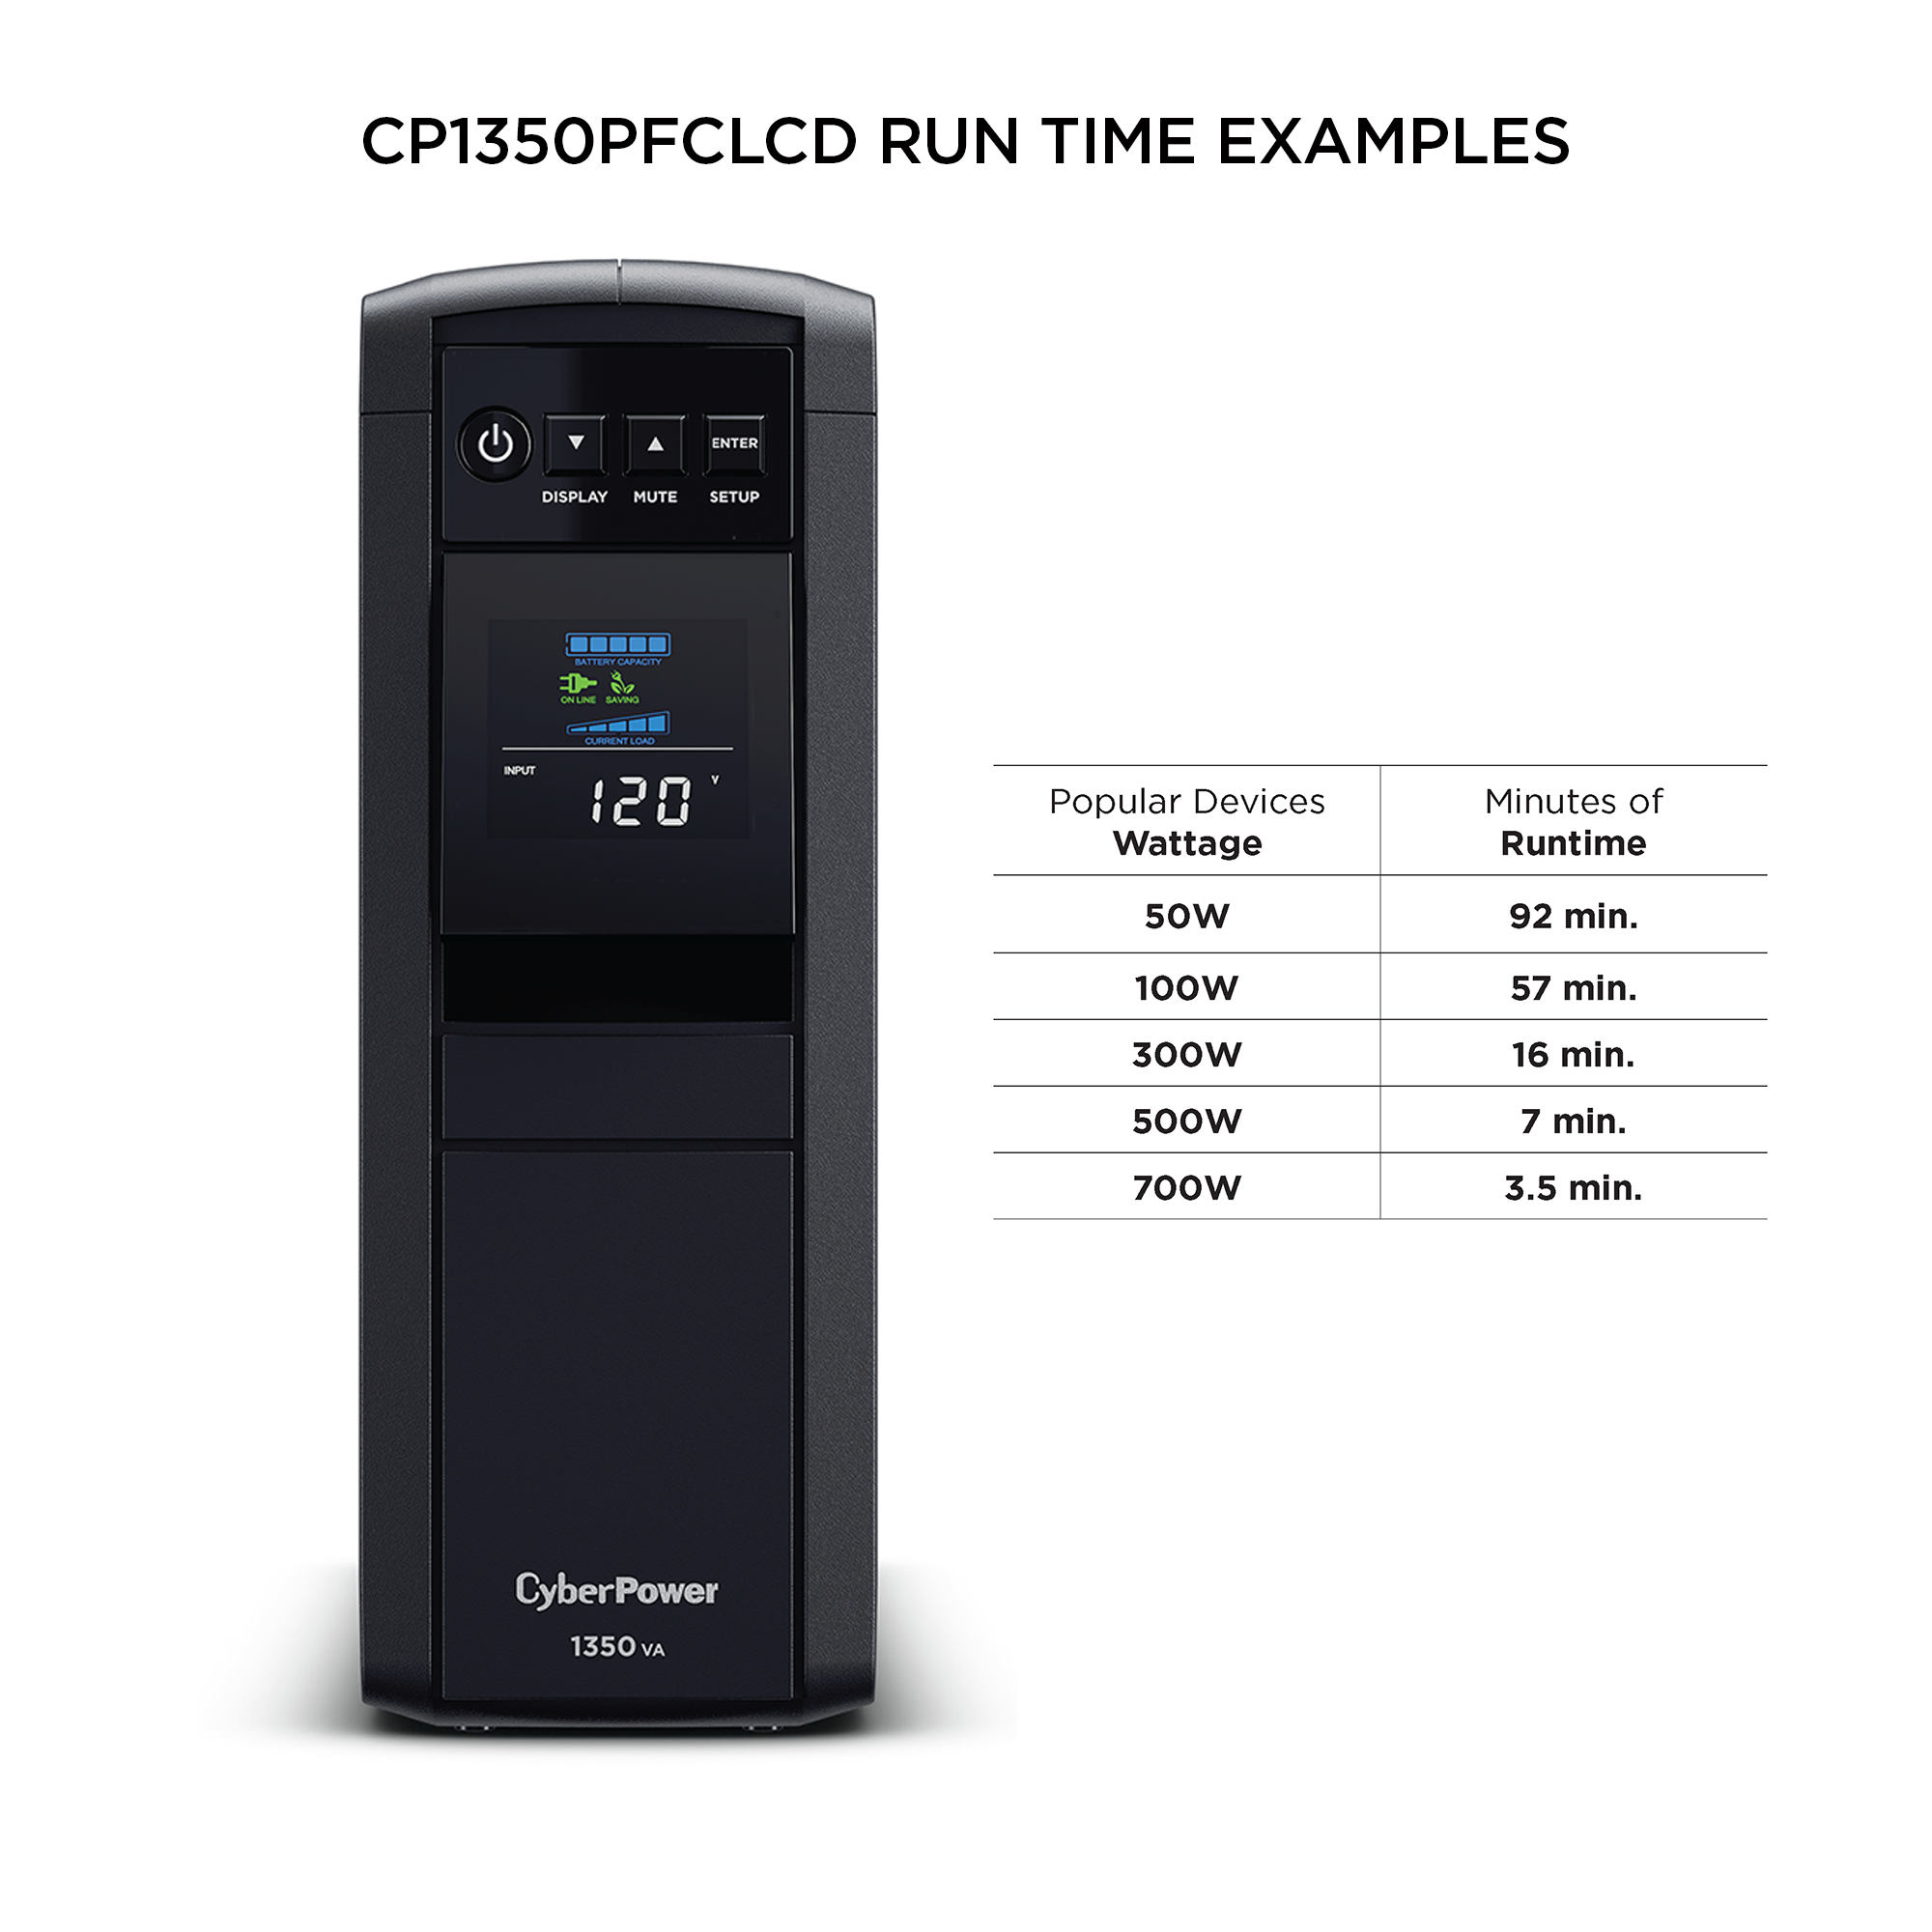 CP1350PFCLCD PFC Sinewave UPS Series Product Details, Specs, Downloads  CyberPower